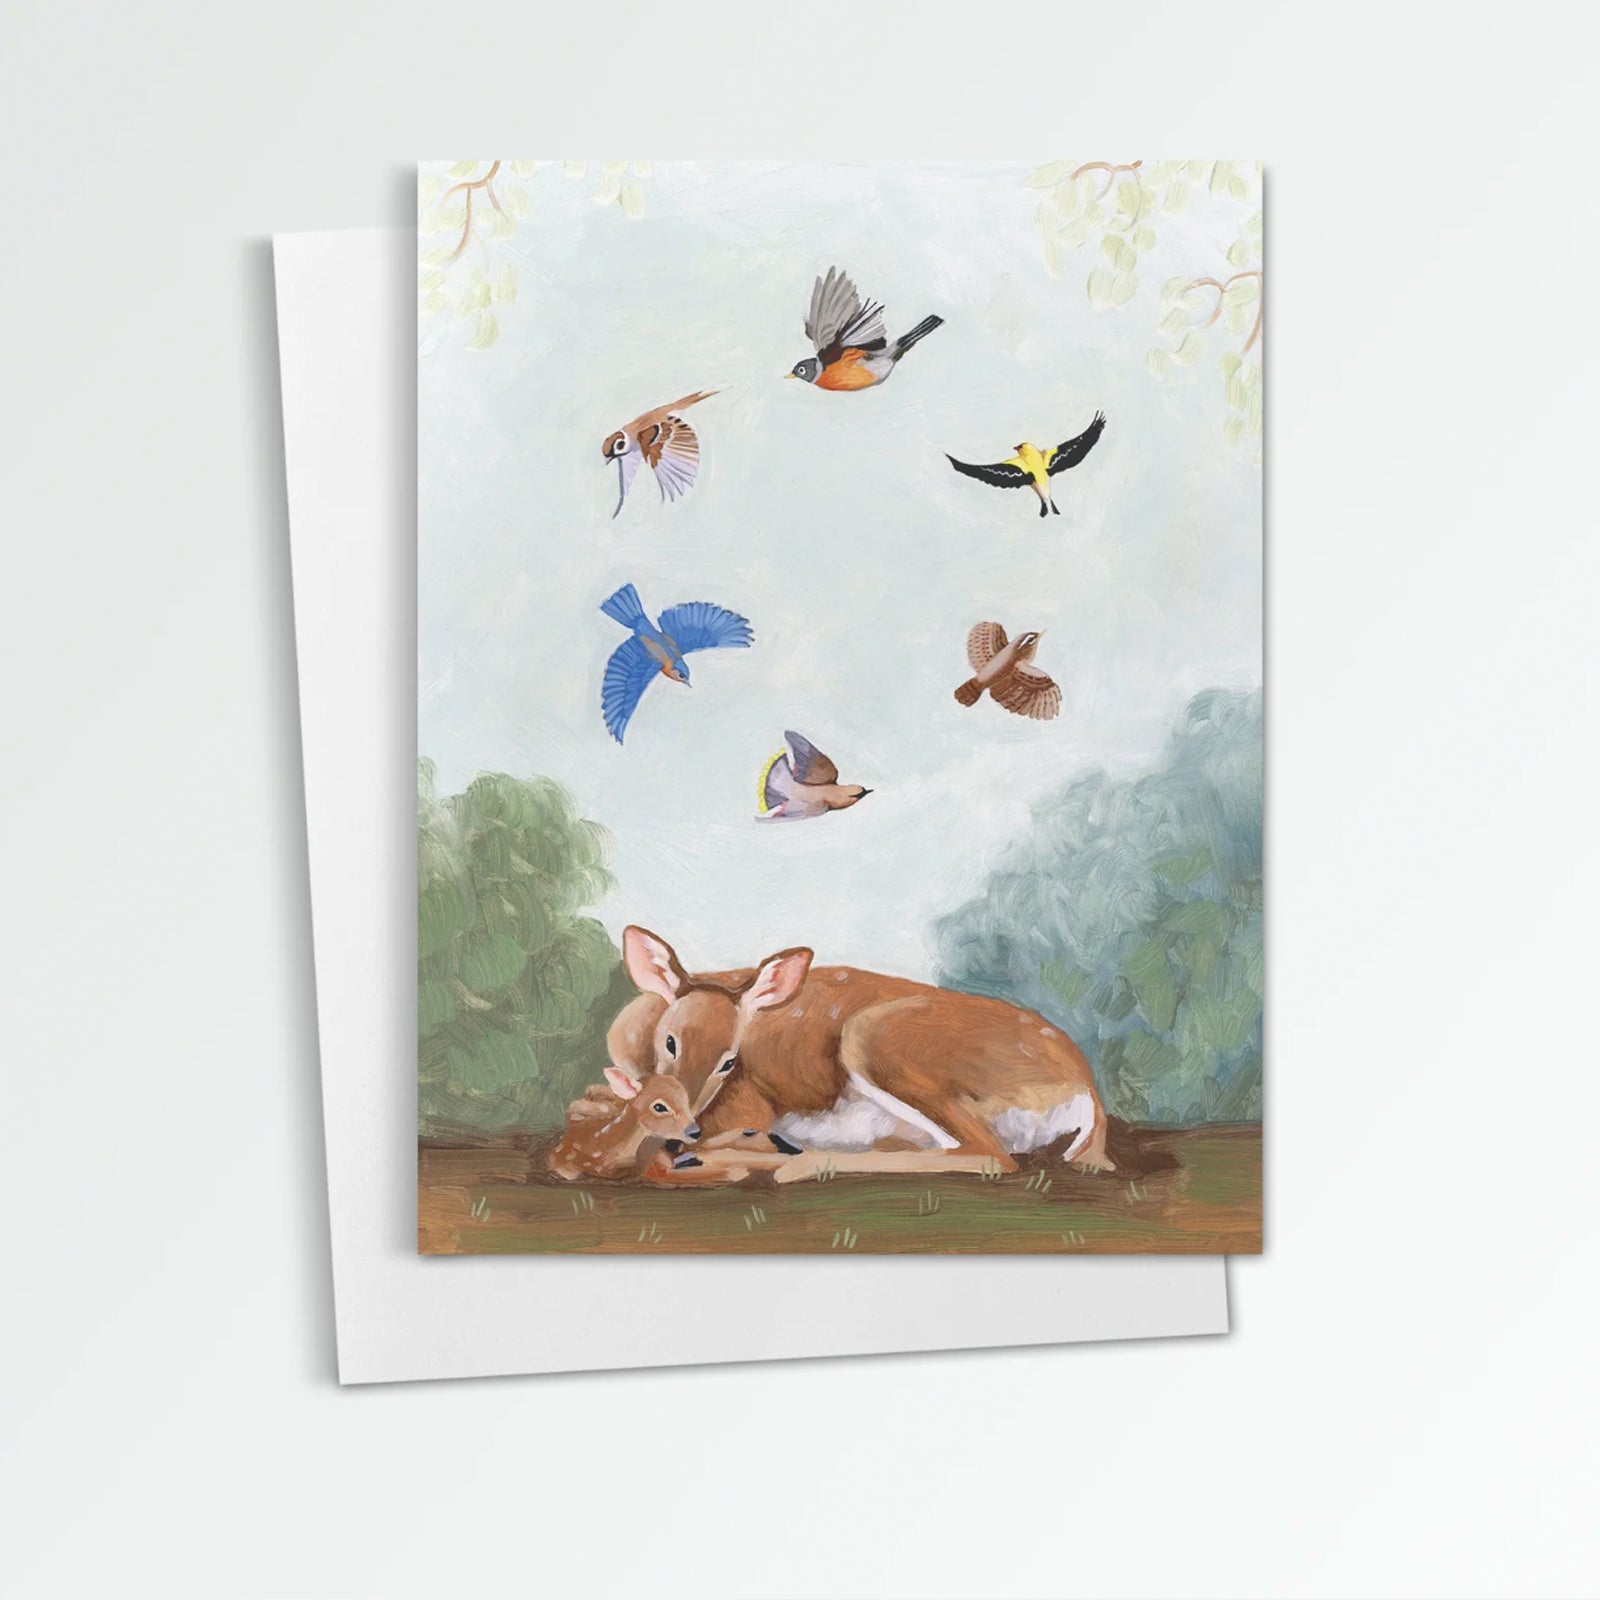 Songbird Serenade notecard from Kim Ferreira, A mother deer and her fawn rest on the ground, birds circle above.